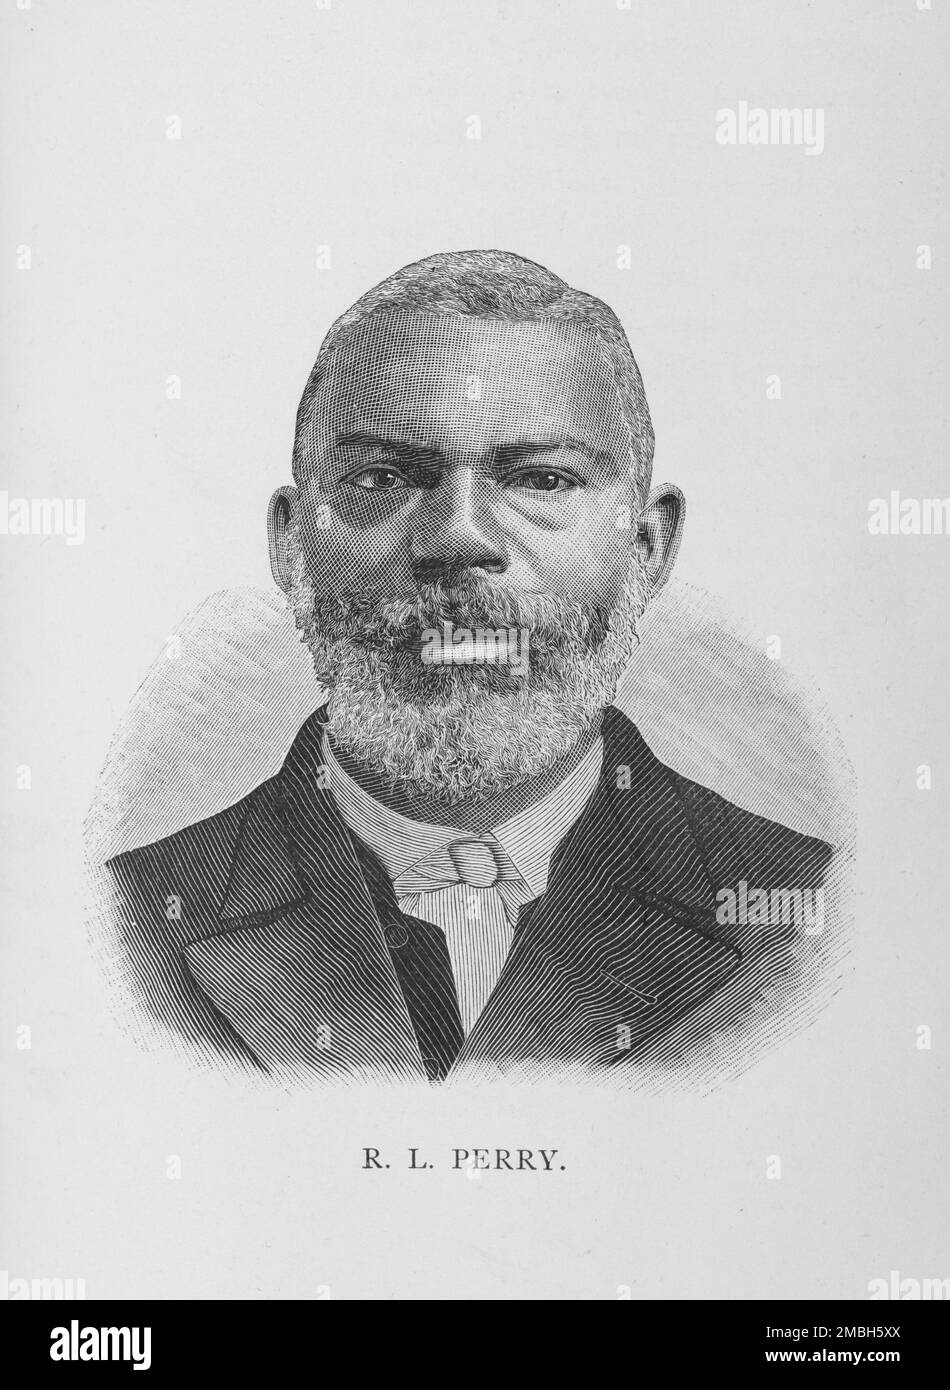 R. L. Perry, 1887. African-American classical scholar, educator, journalist, newspaper editor and Baptist minister Rufus L. Perry was a prominent member of the African Civilization Society, and a co-founder of the Howard Colored Orphan Asylum. From &quot;Men of Mark: Eminent, Progressive and Rising&quot; by William J. Simmons. Stock Photo